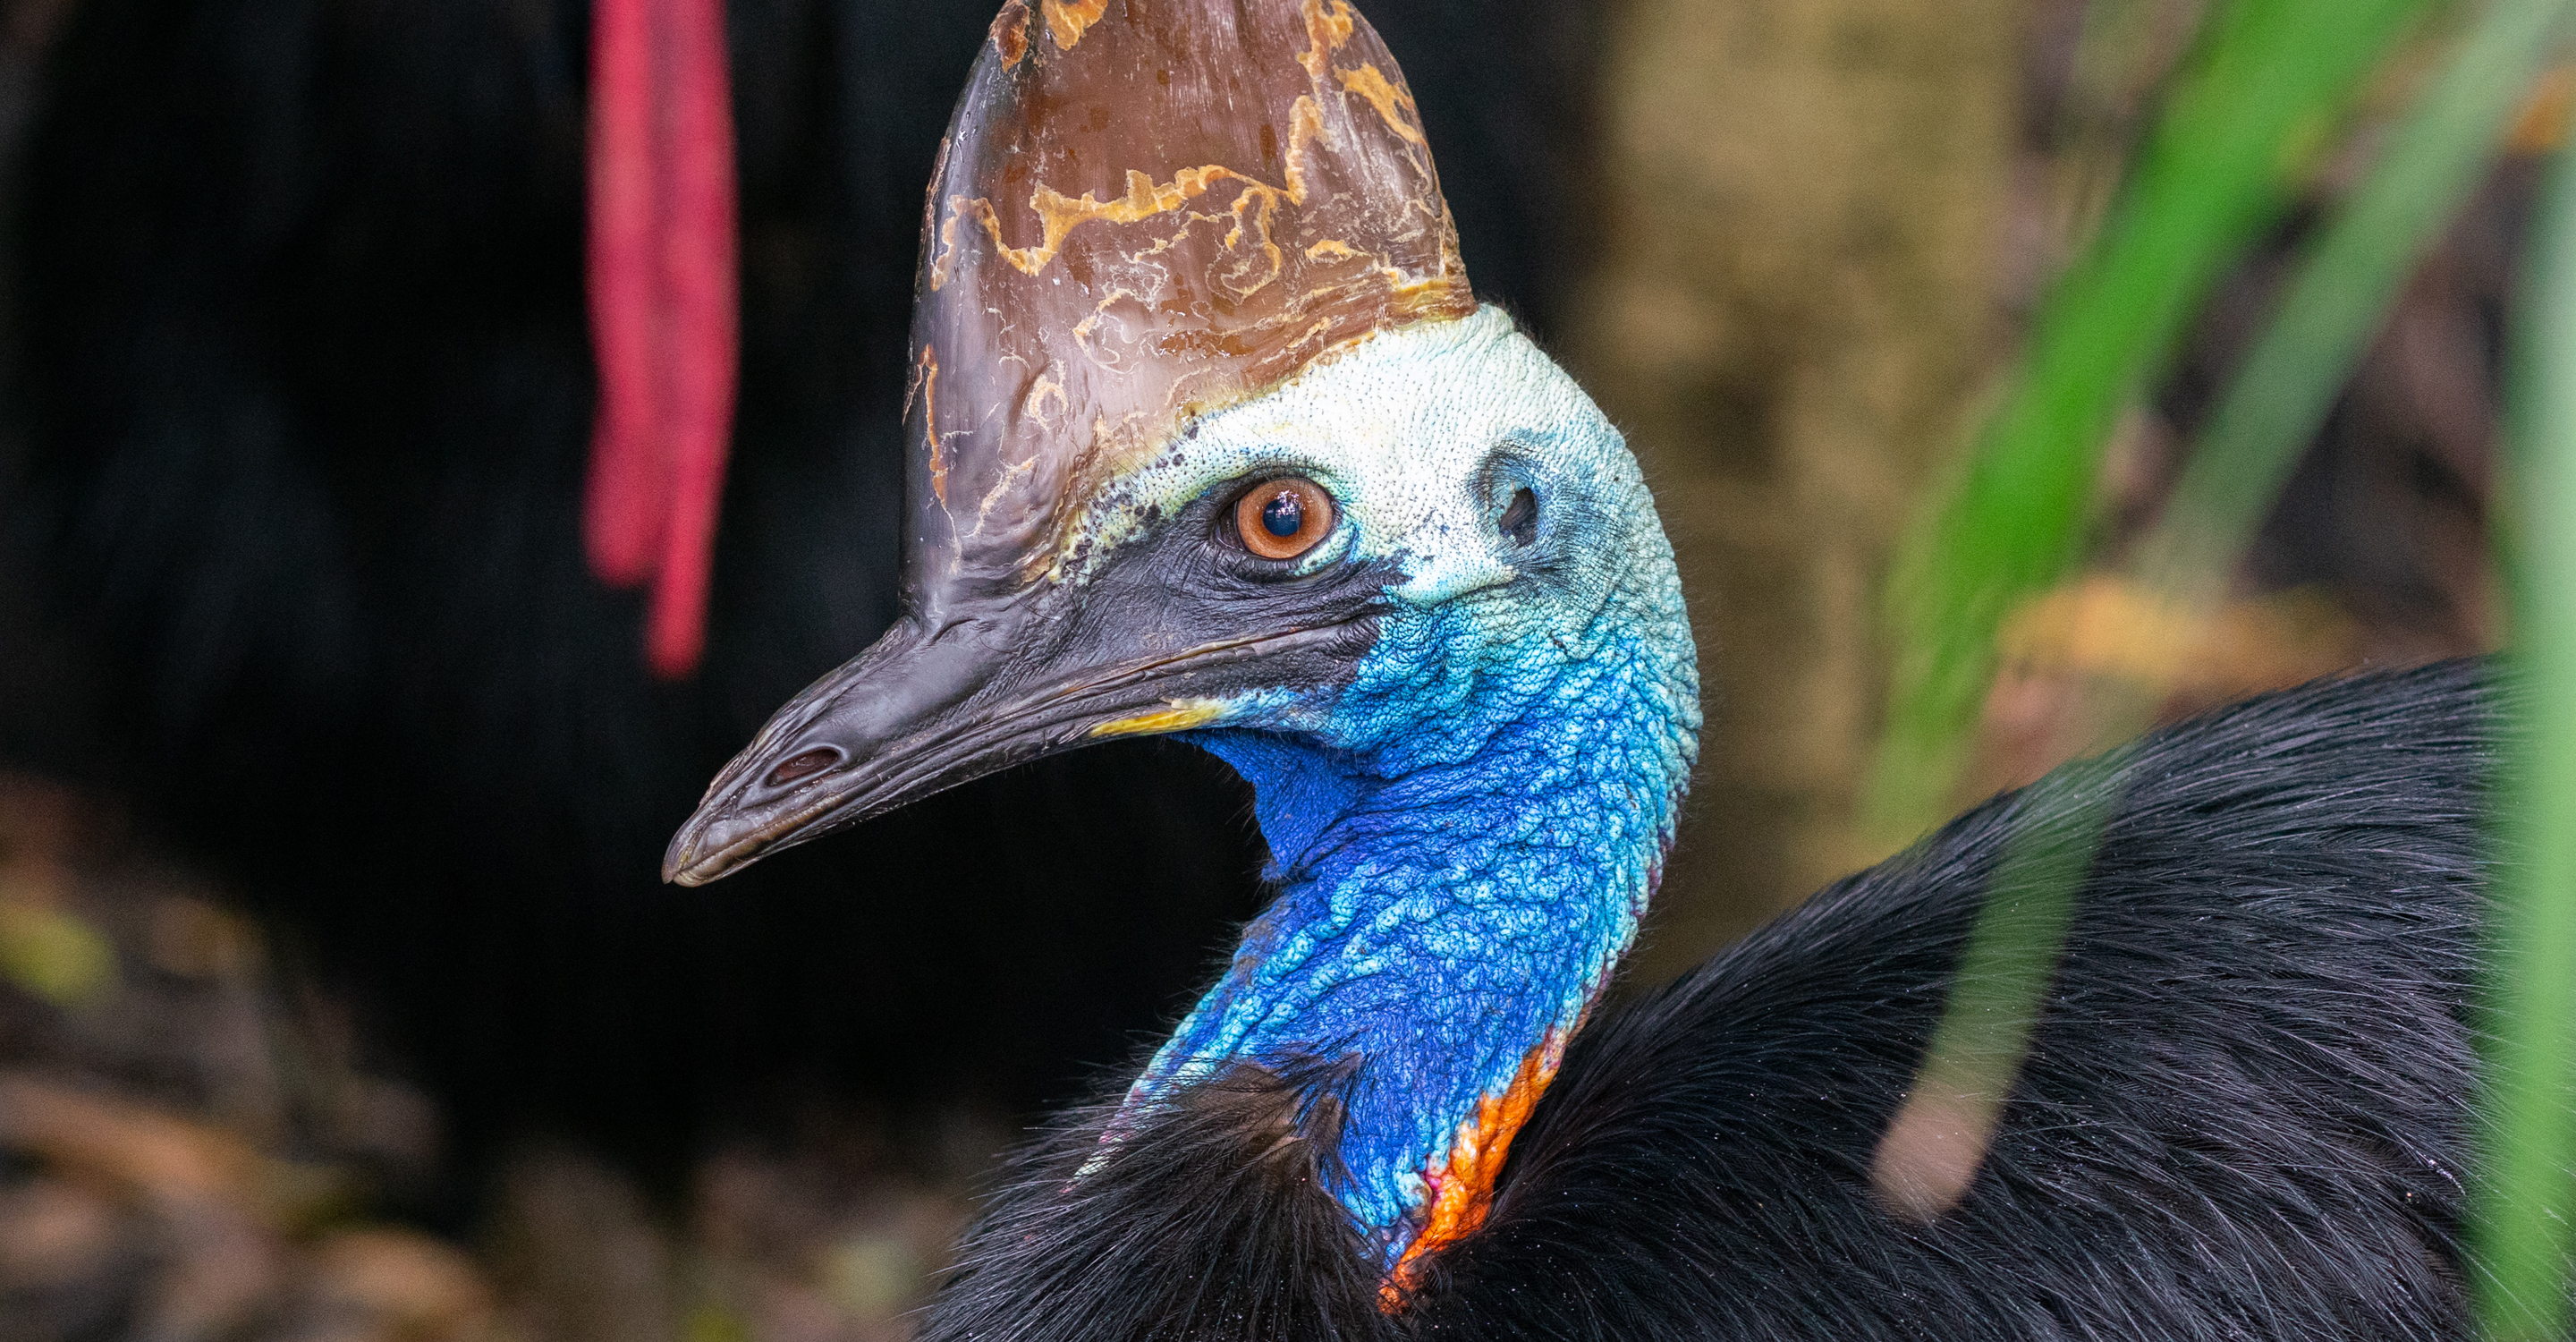 Close-up view of a Southern Cassowary, Daintree National Park, Australia